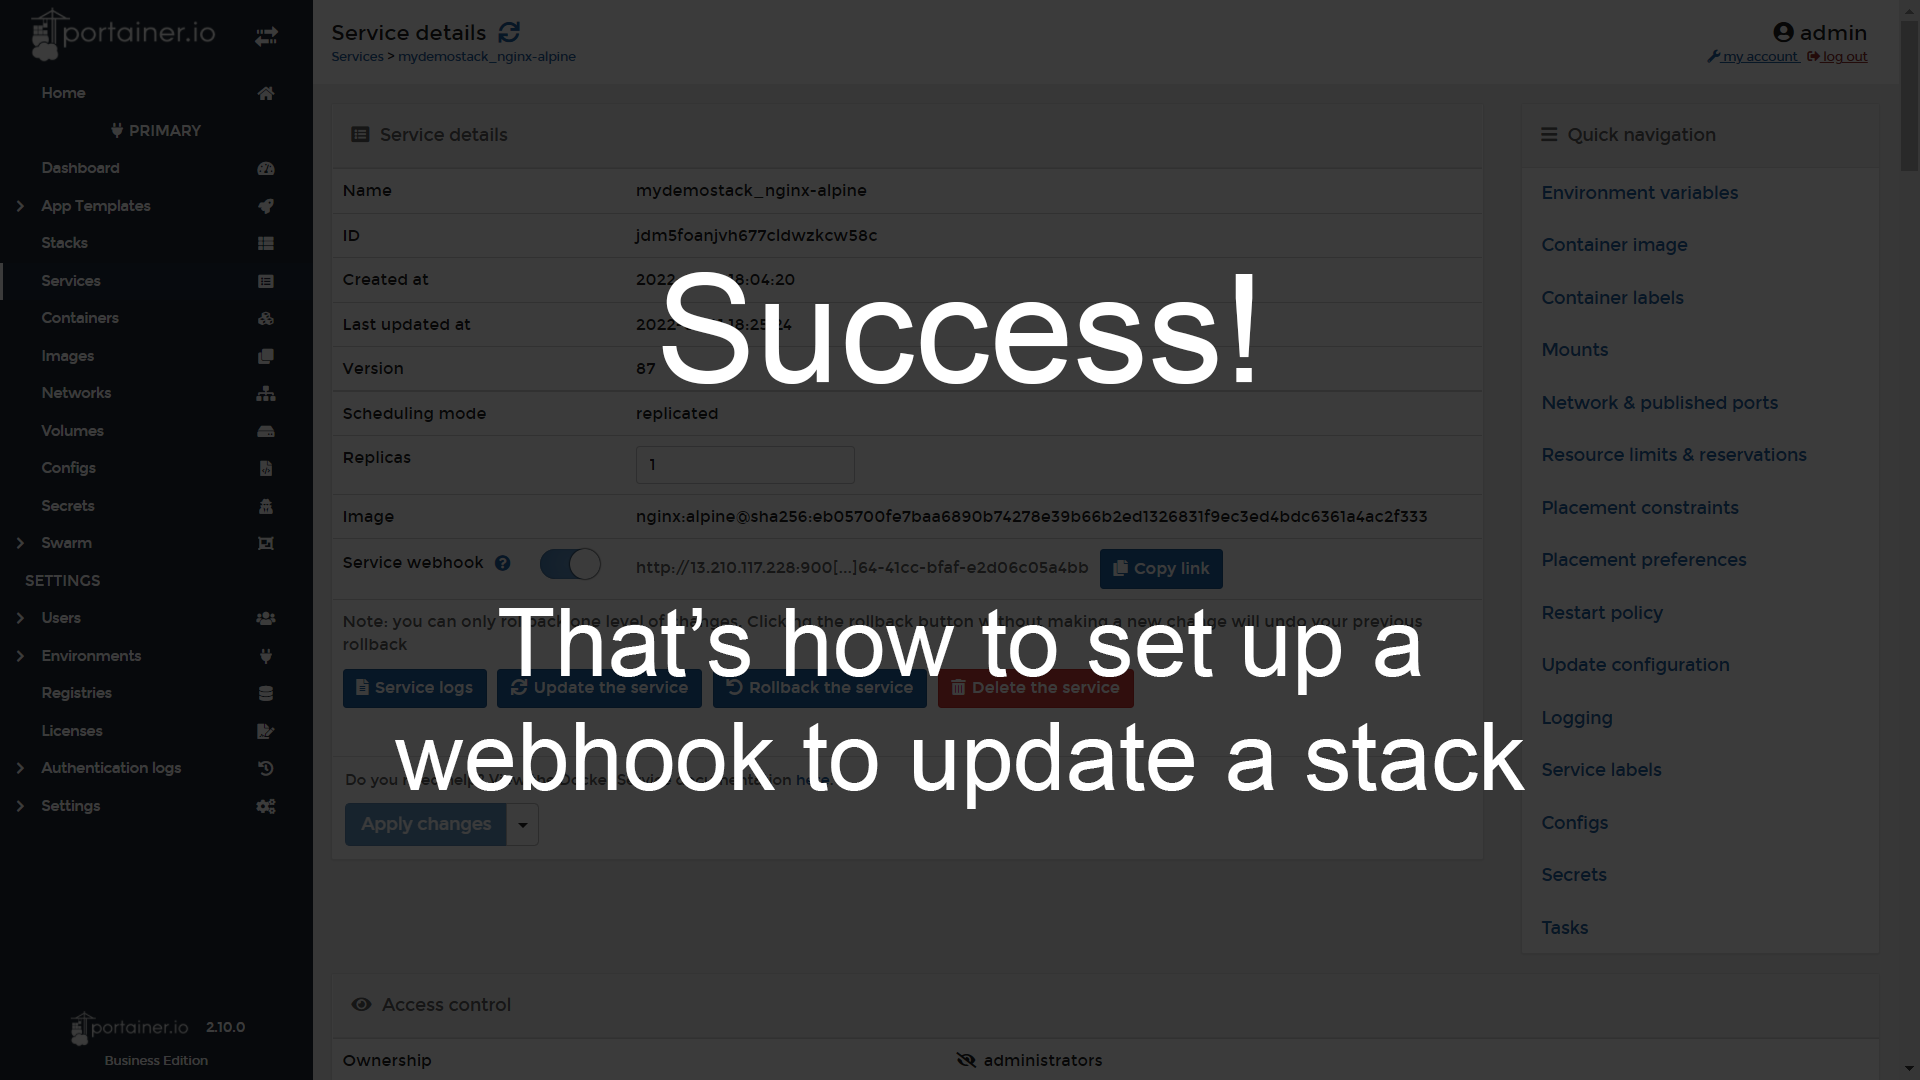 You have now set up a webhook to update a stack